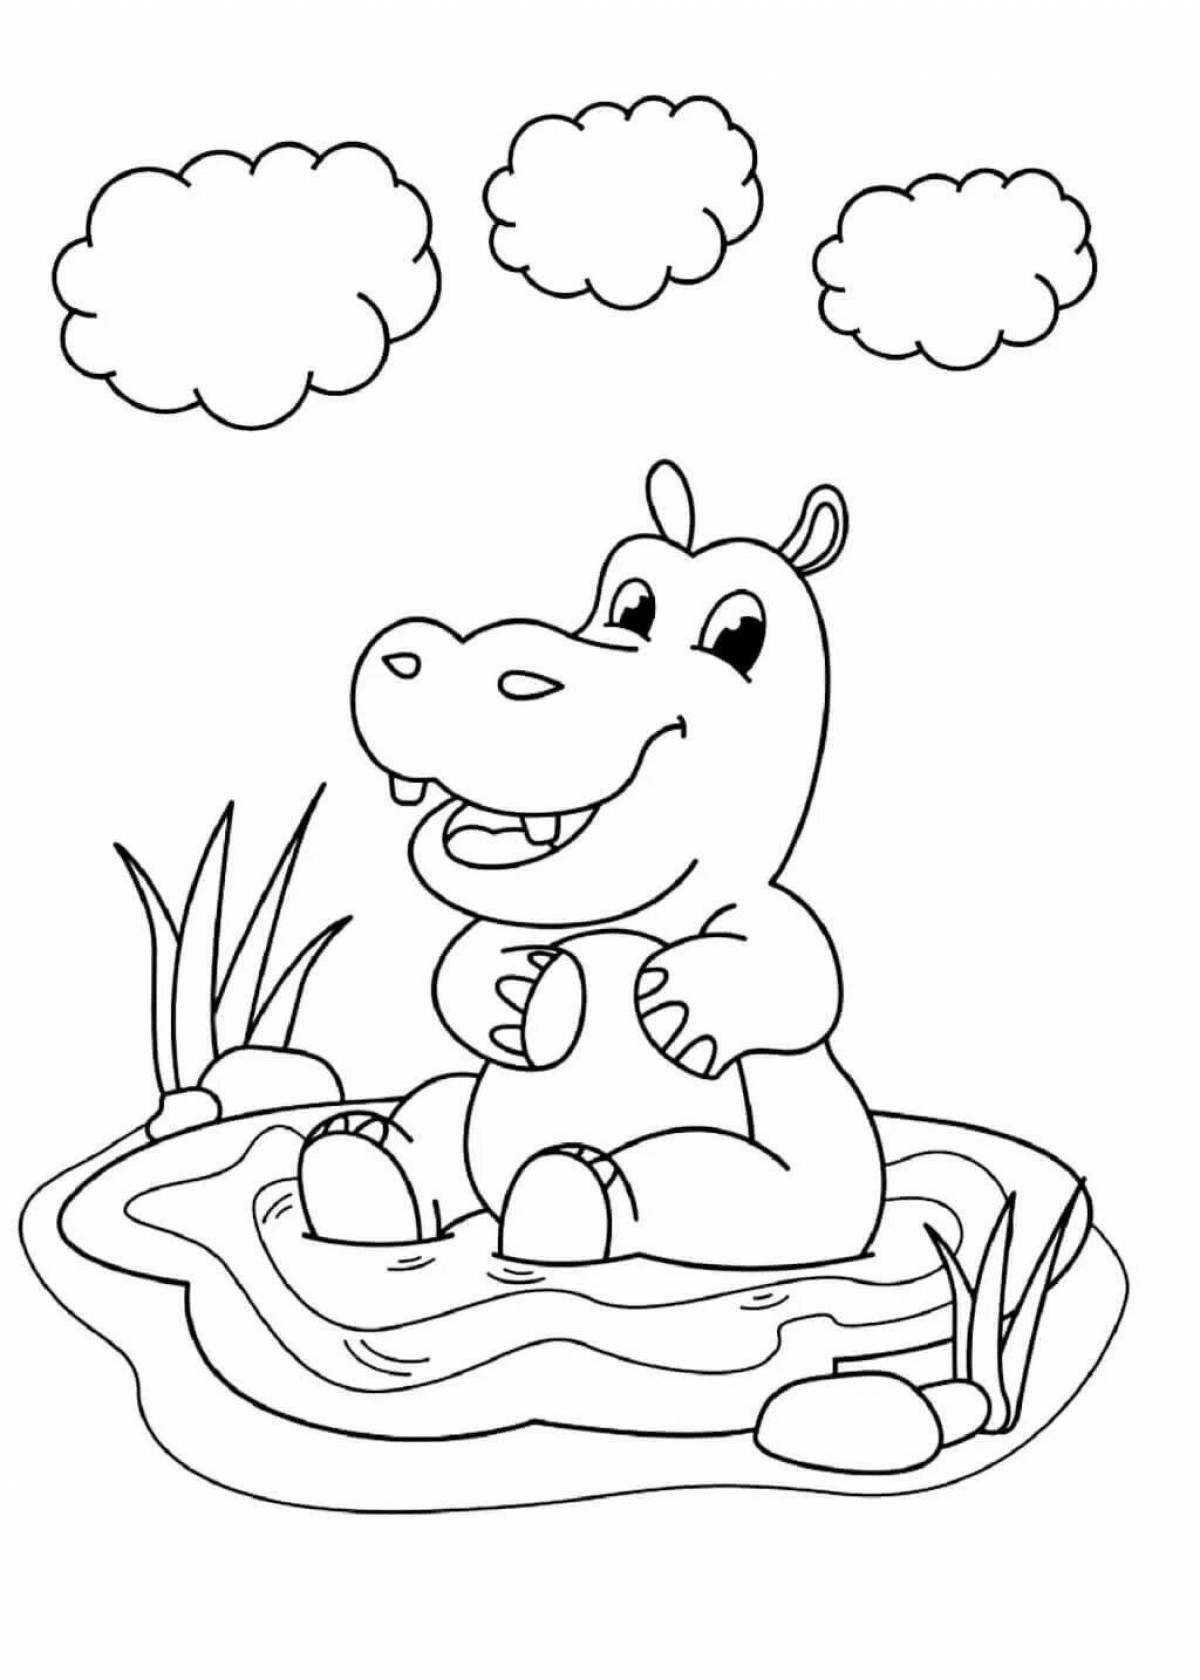 Adorable hippo coloring for children 3-4 years old